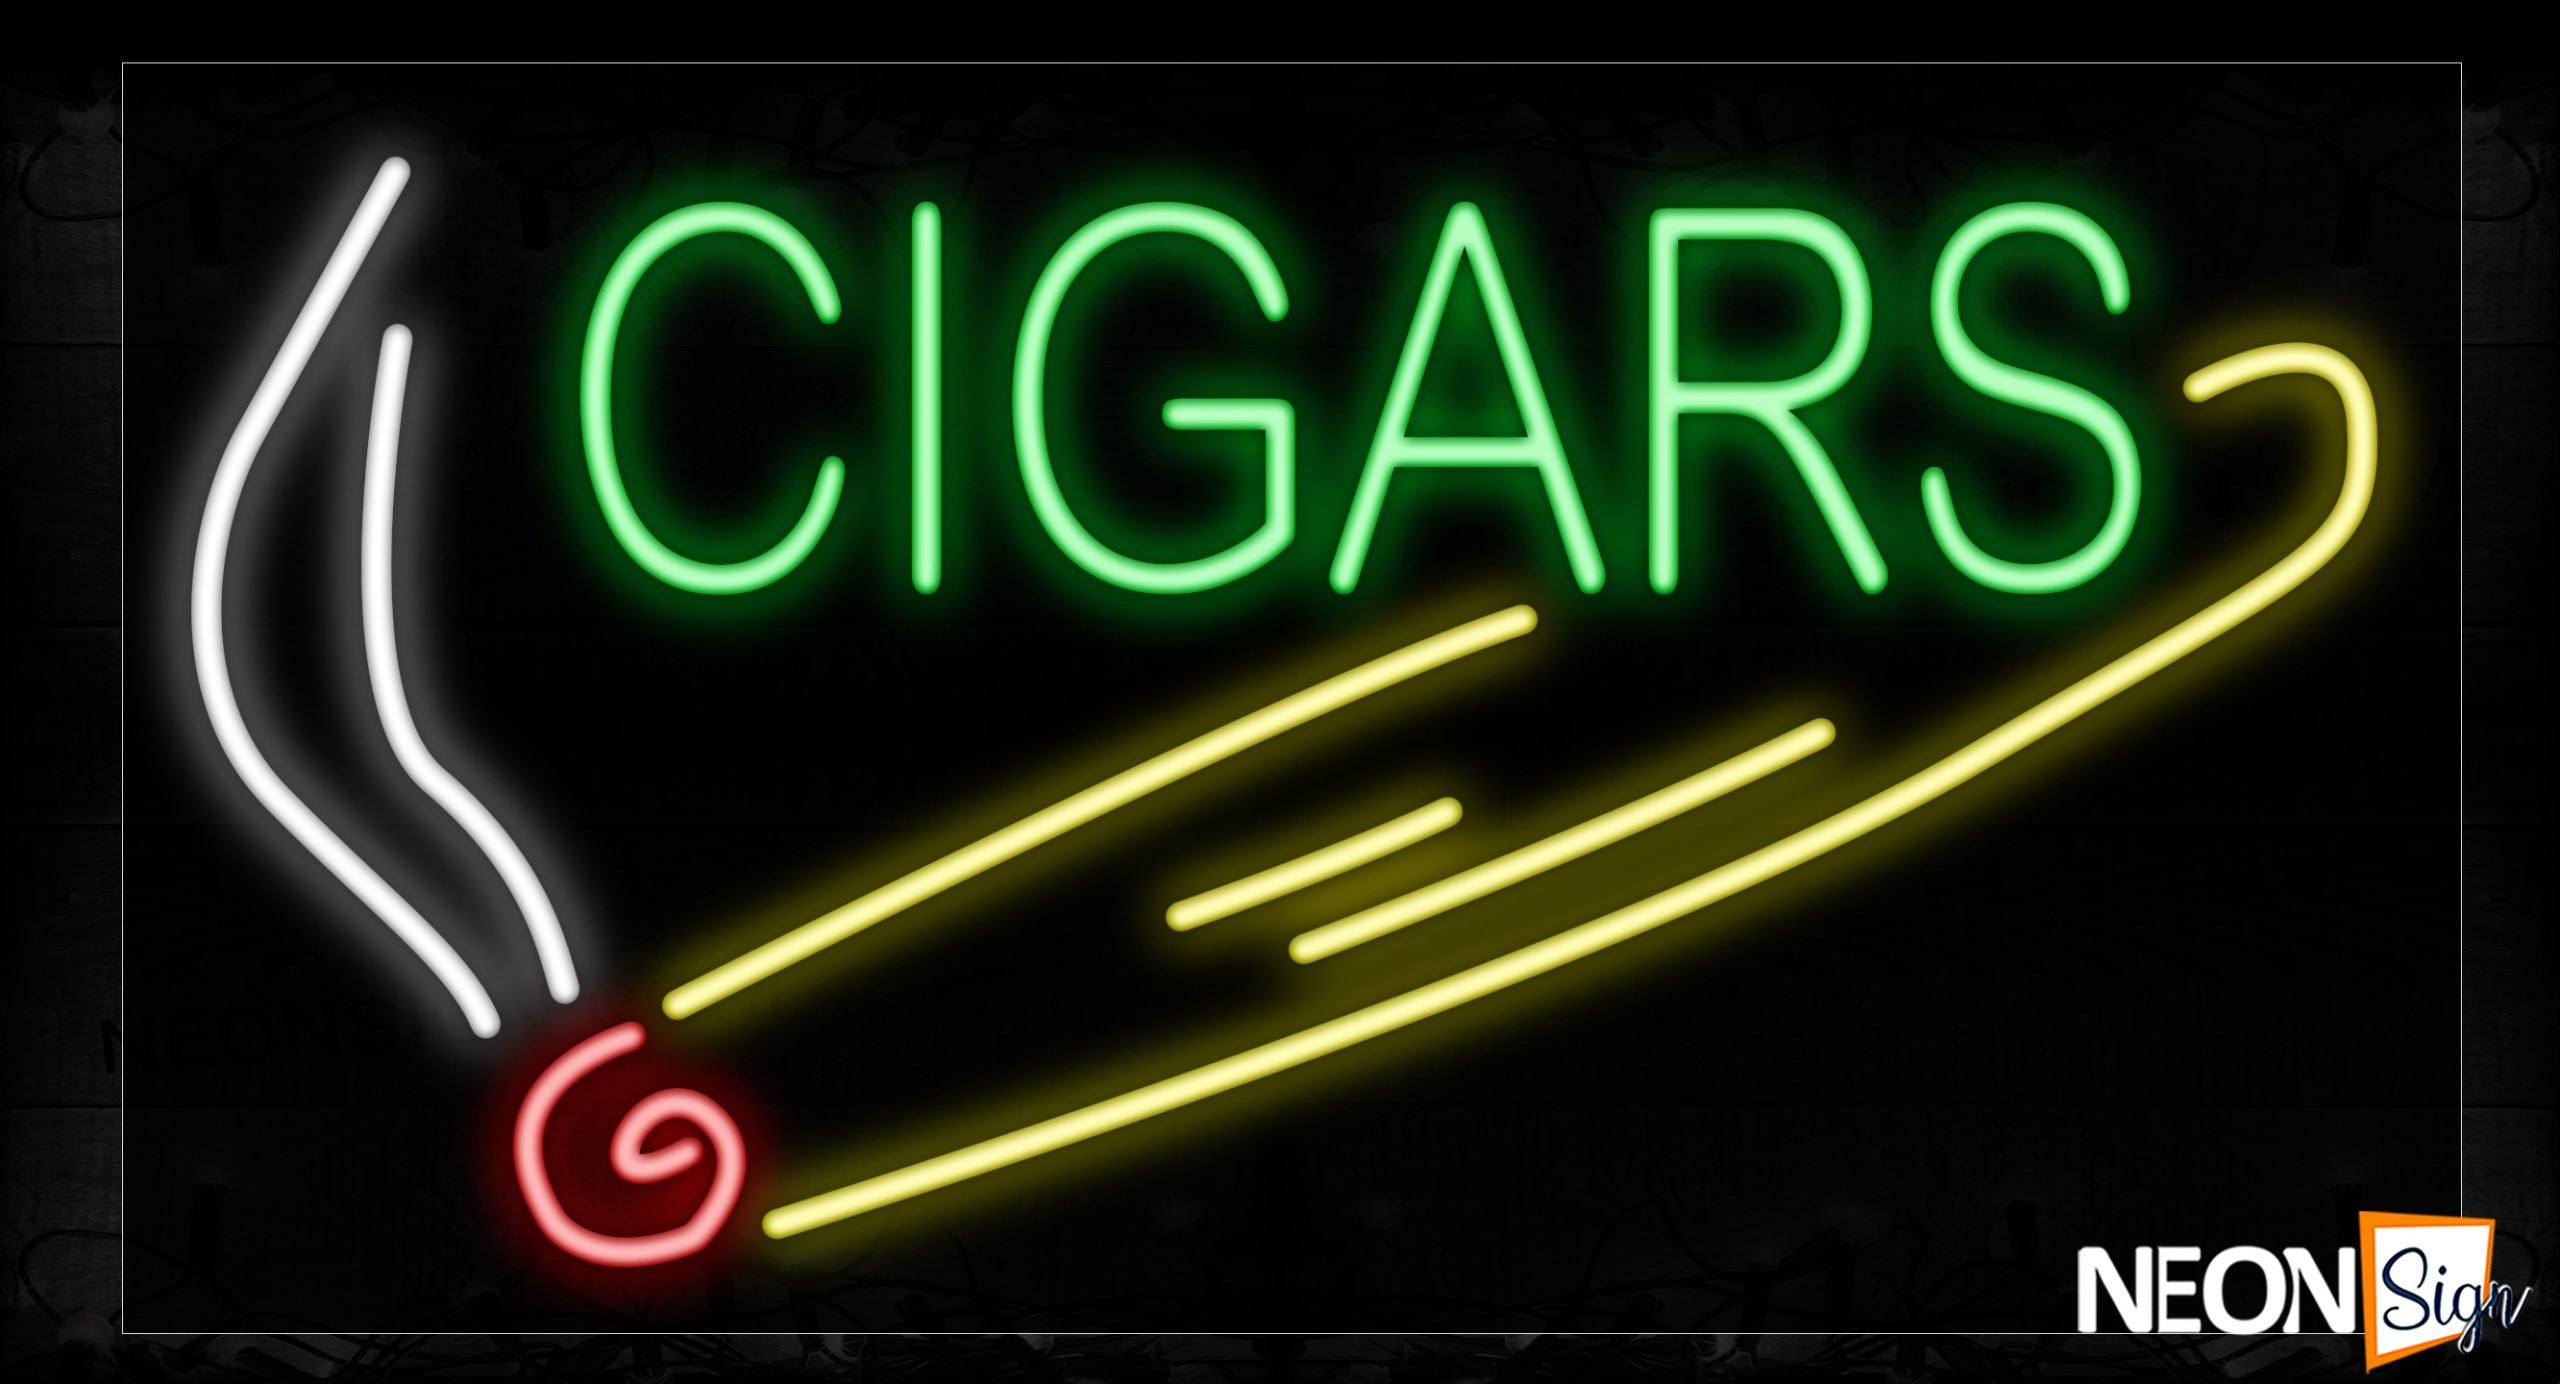 Image of 10419 Cigars In Green With Logo Neon Signs_20x37 Black Backing